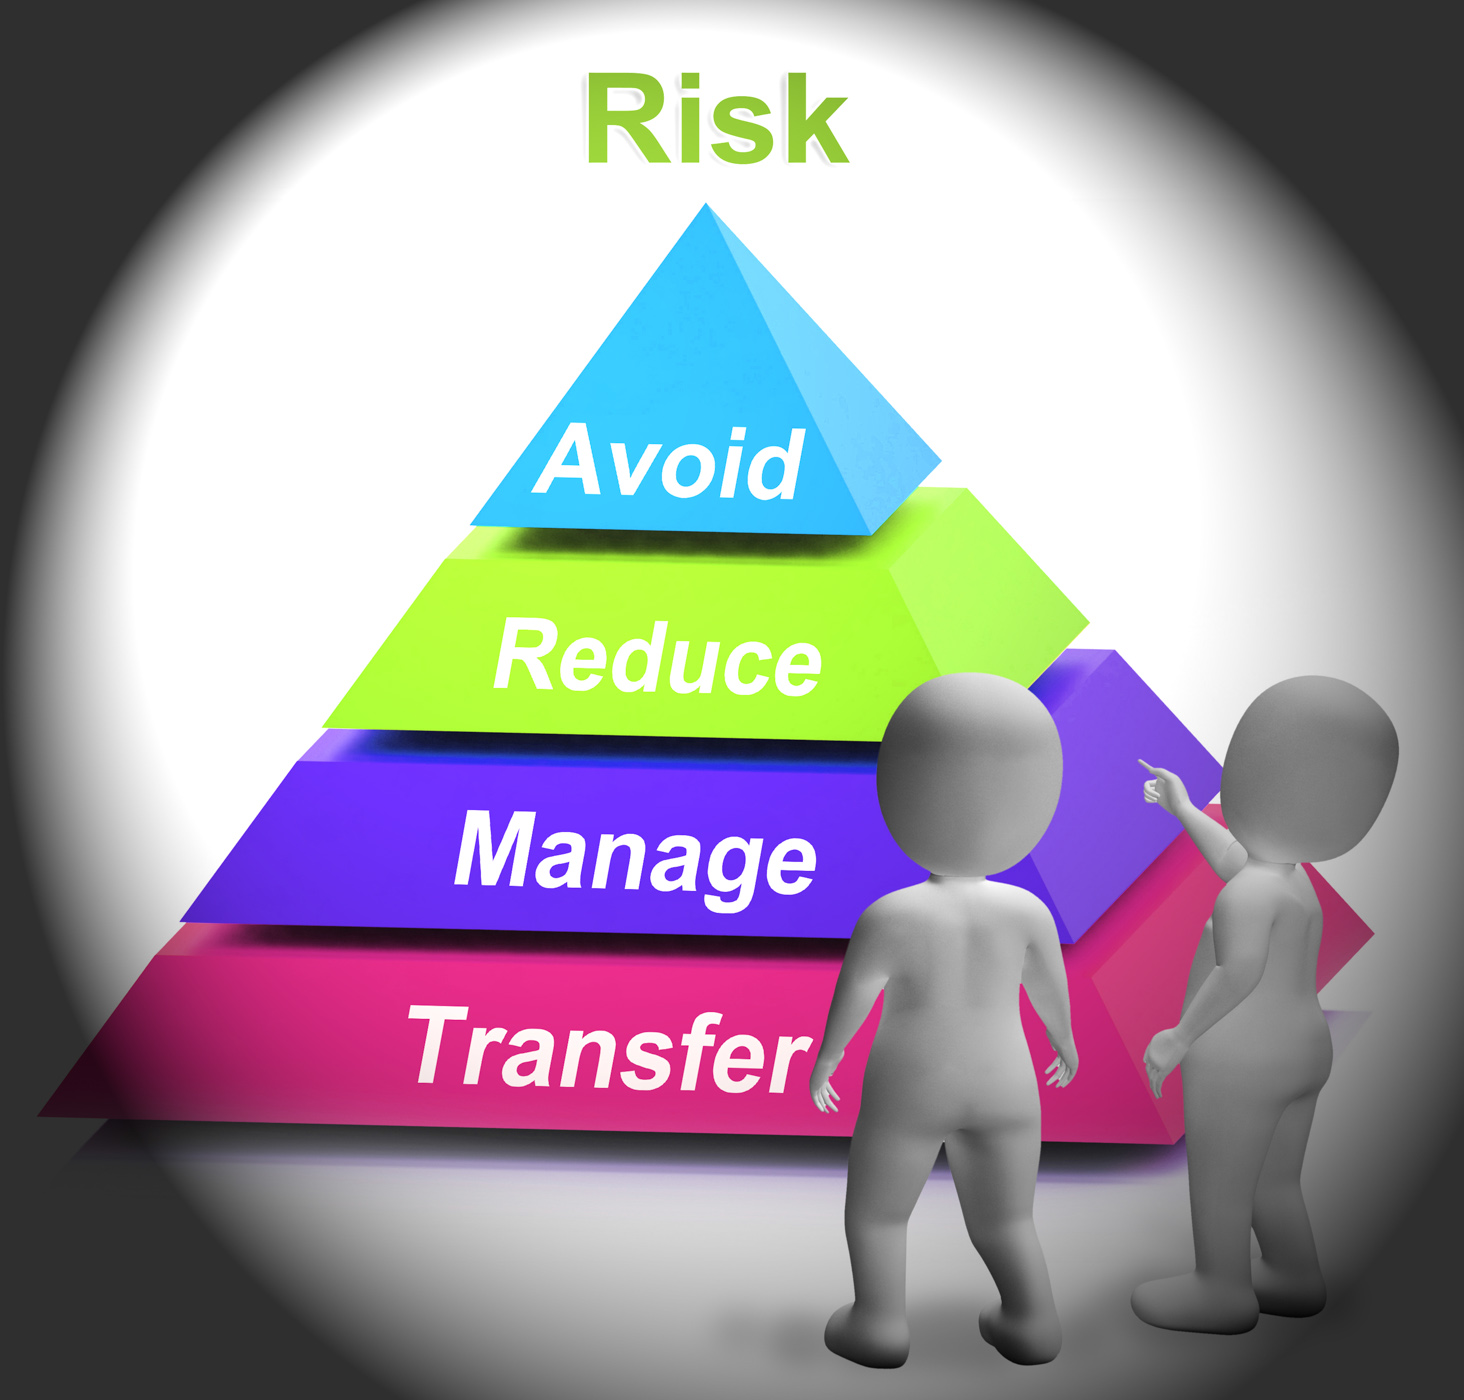 Risk symbol shows risky or uncertain situation photo